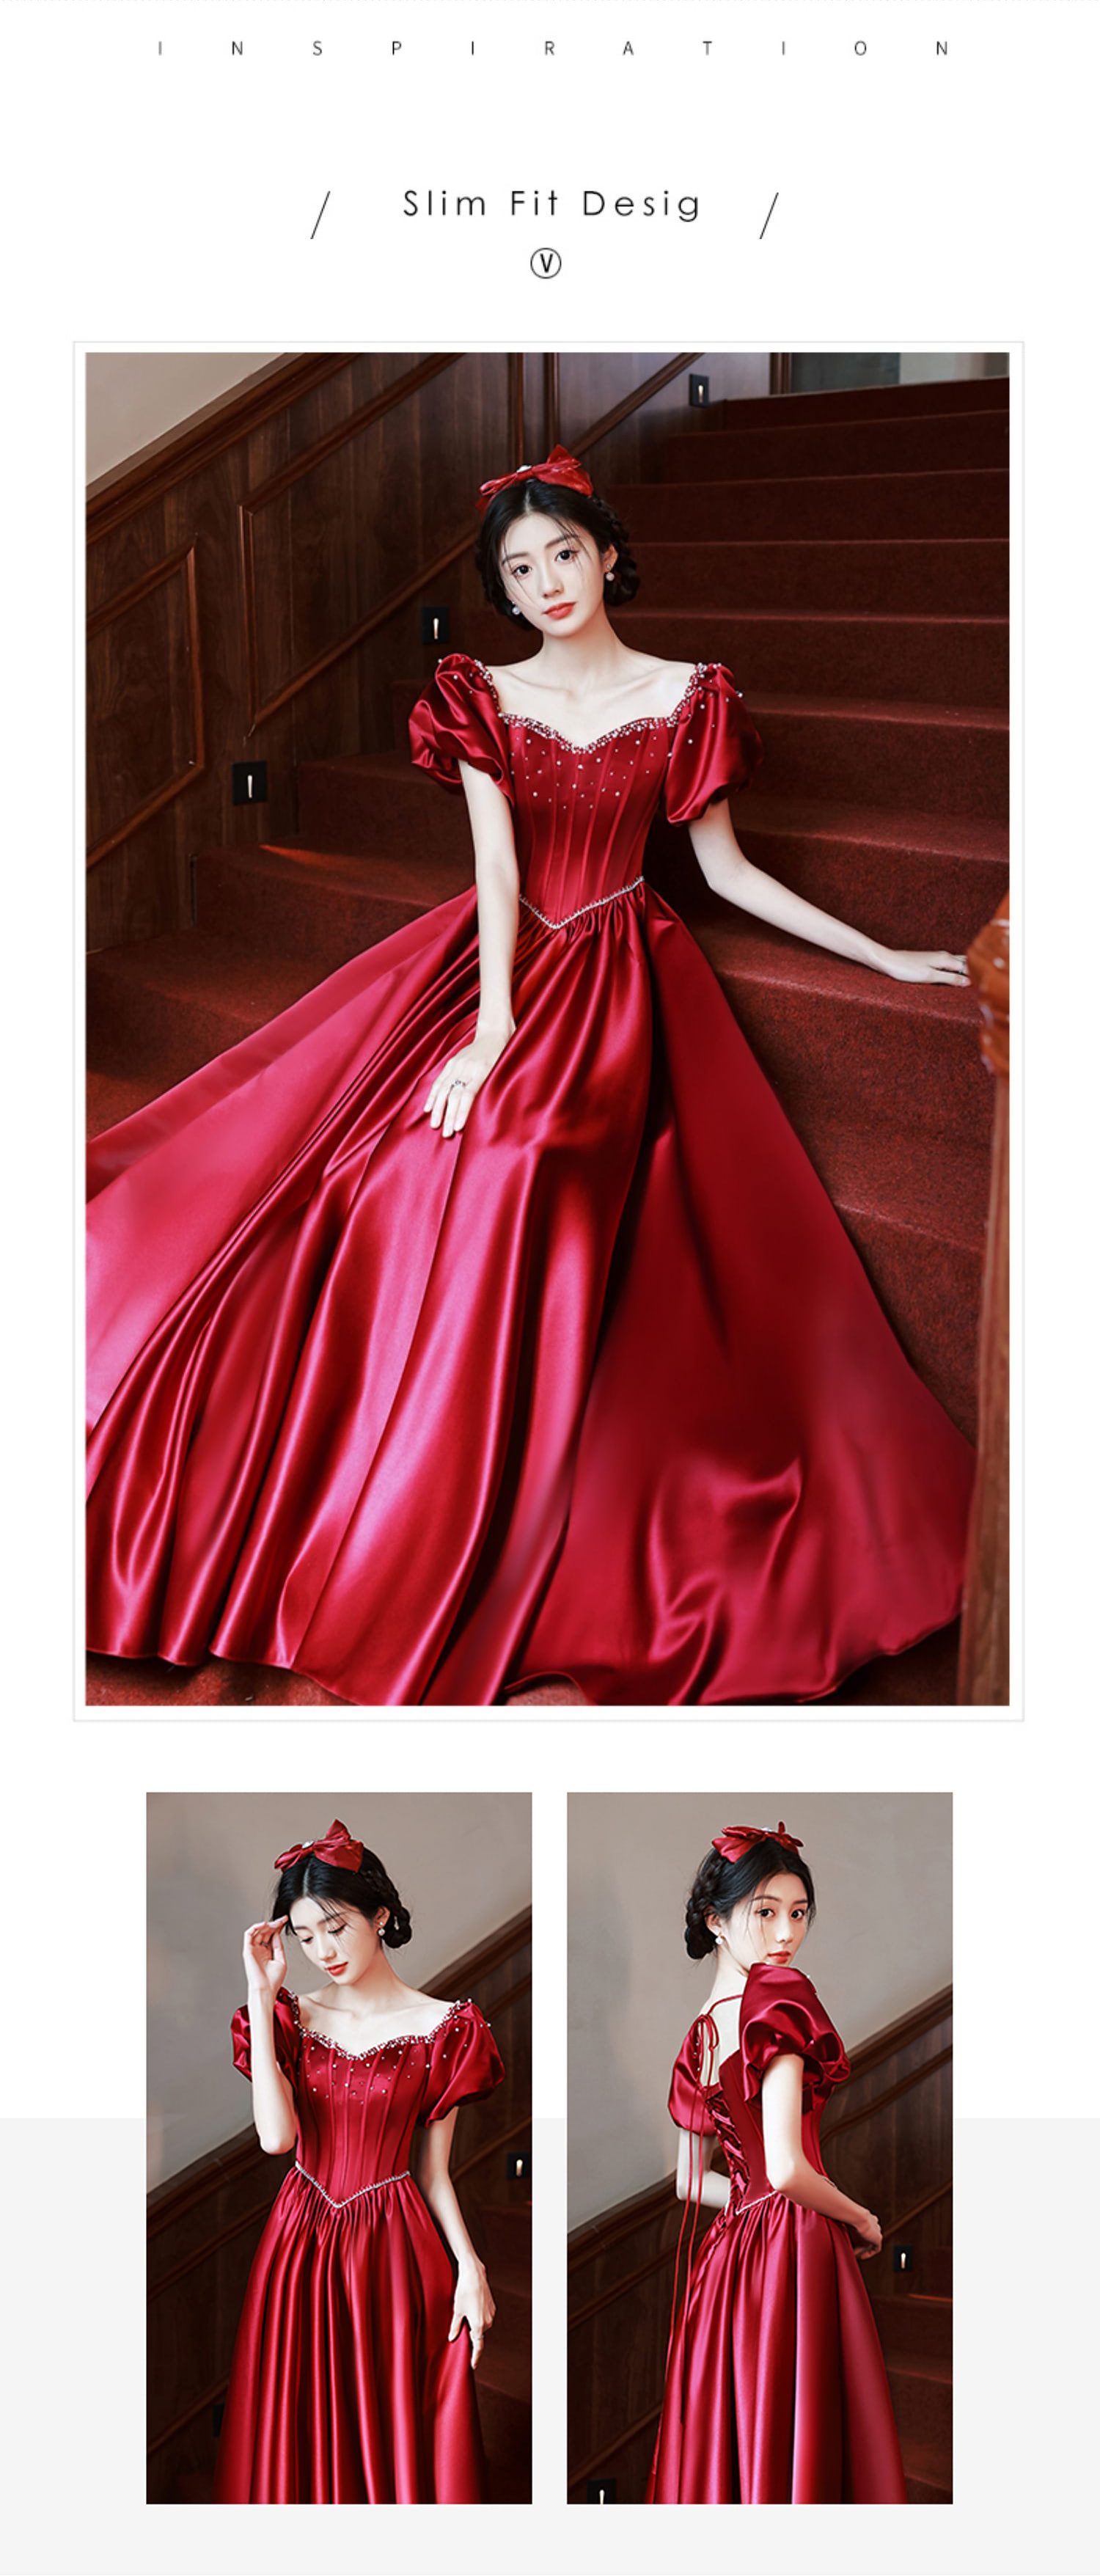 A-Line-Classy-Satin-Cocktail-Formal-Prom-Long-Dress-with-Sleeves08